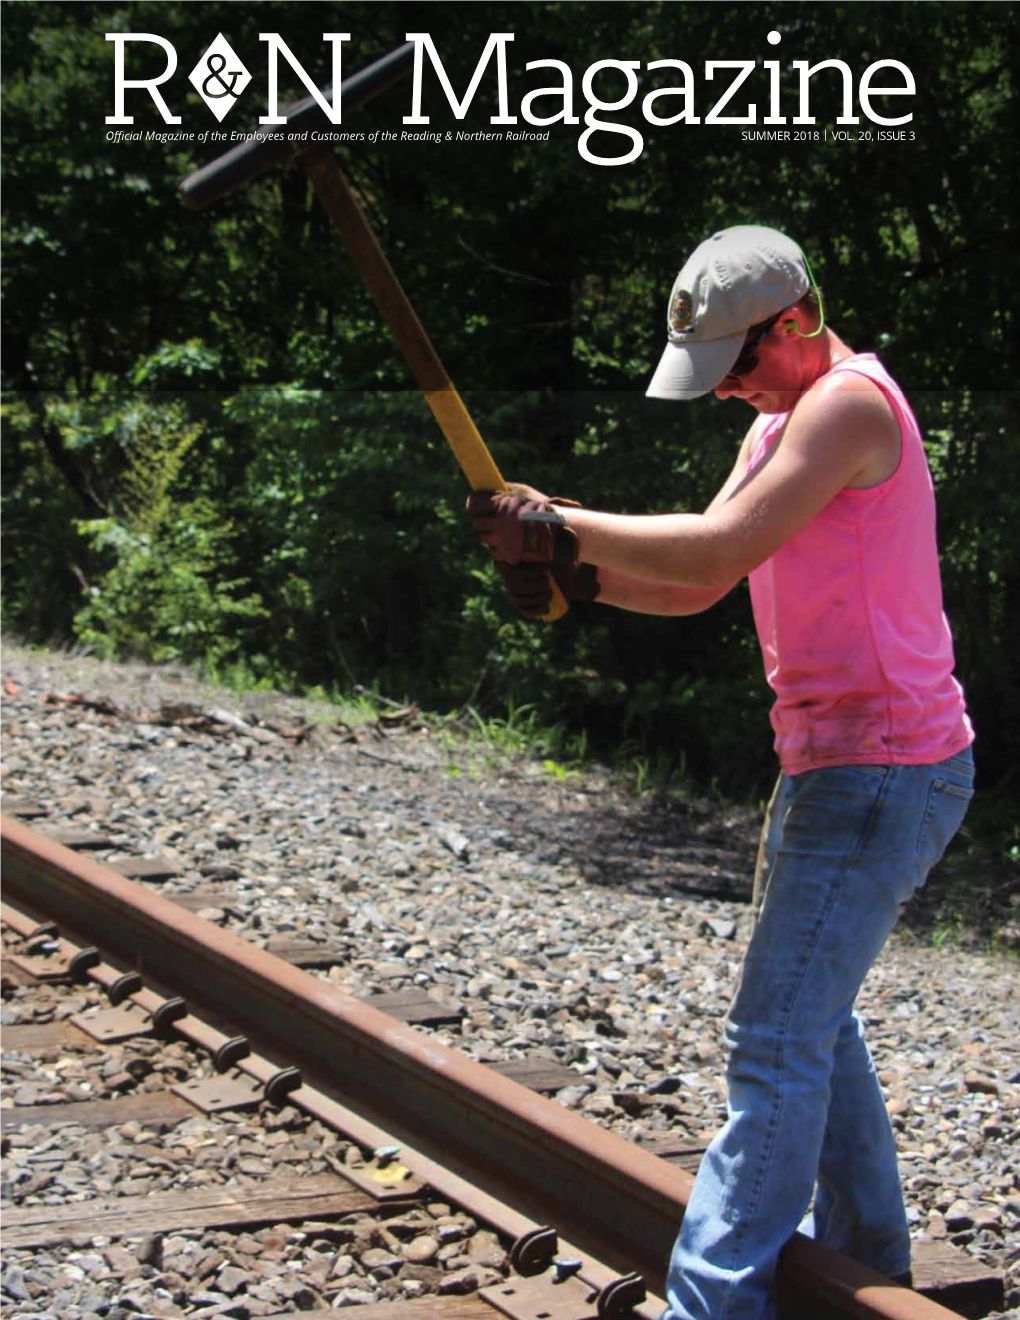 Summer 2018 | VOL. 20, Issue 3 Official Magazine of the Employees and Customers of the Reading & Northern Railroad